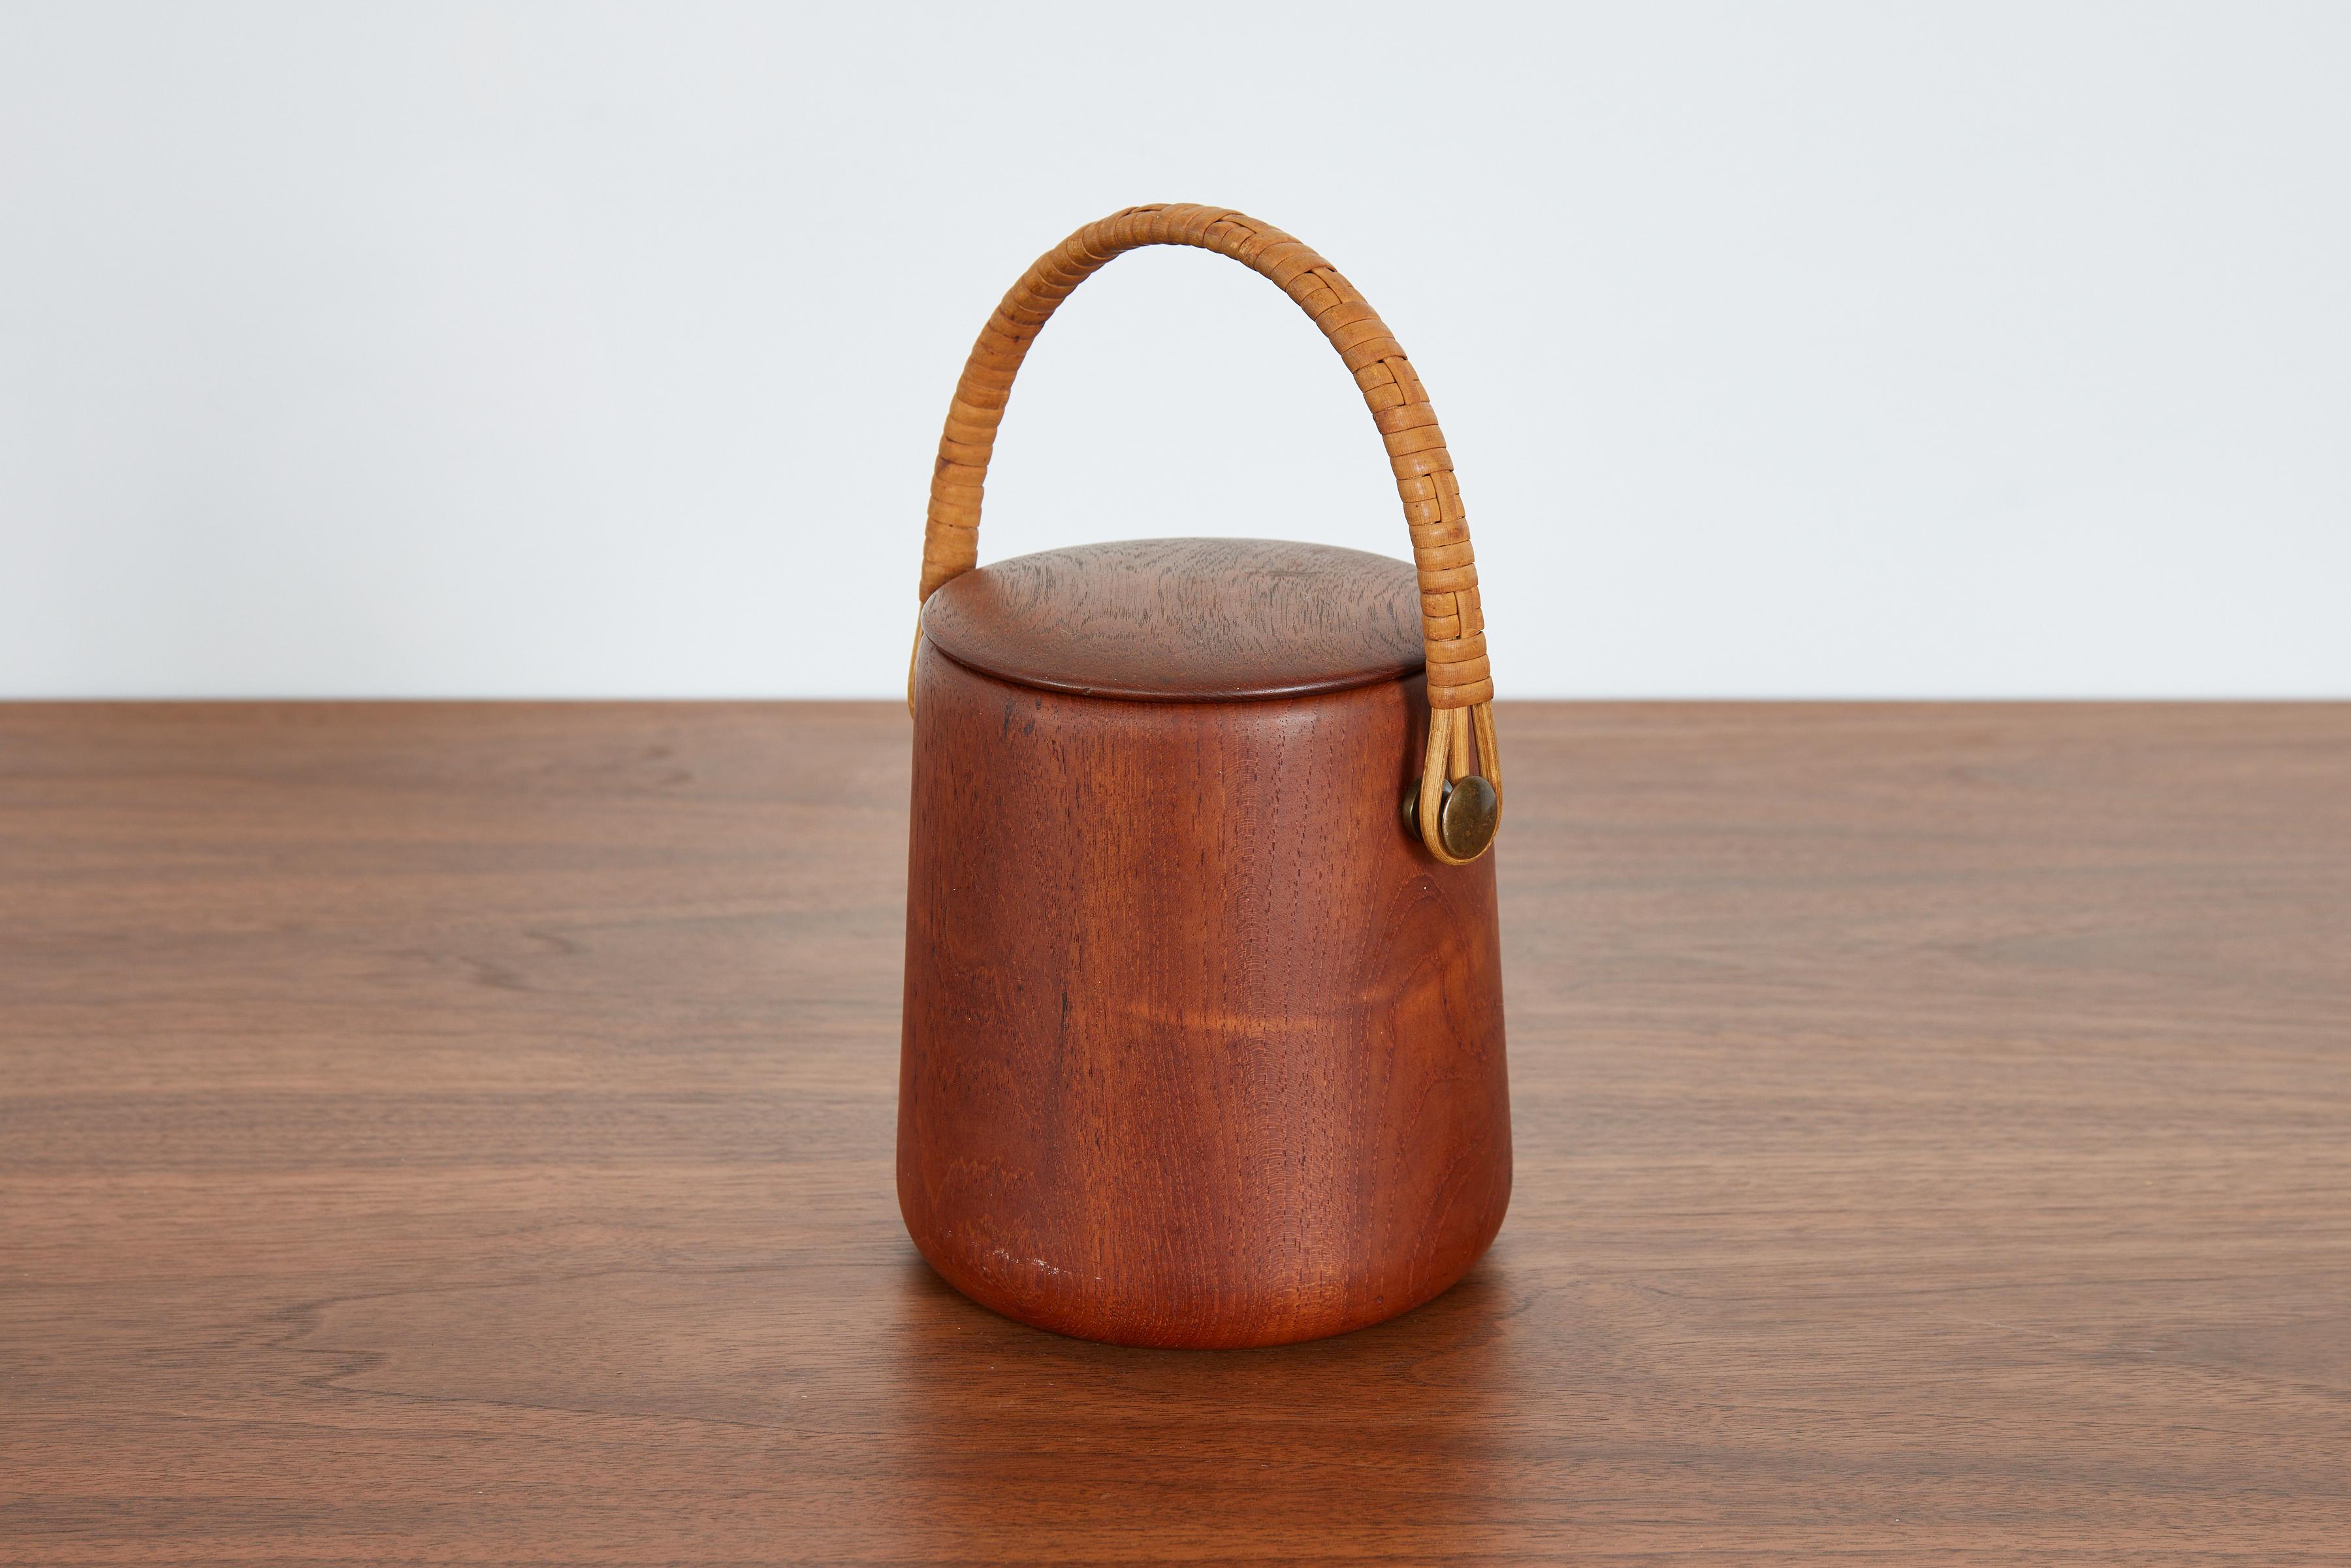 Chic Italian ice bucket in teak wood and woven rattan handle. 
Brass metal insert to hold ice 
Italy, 1950s
